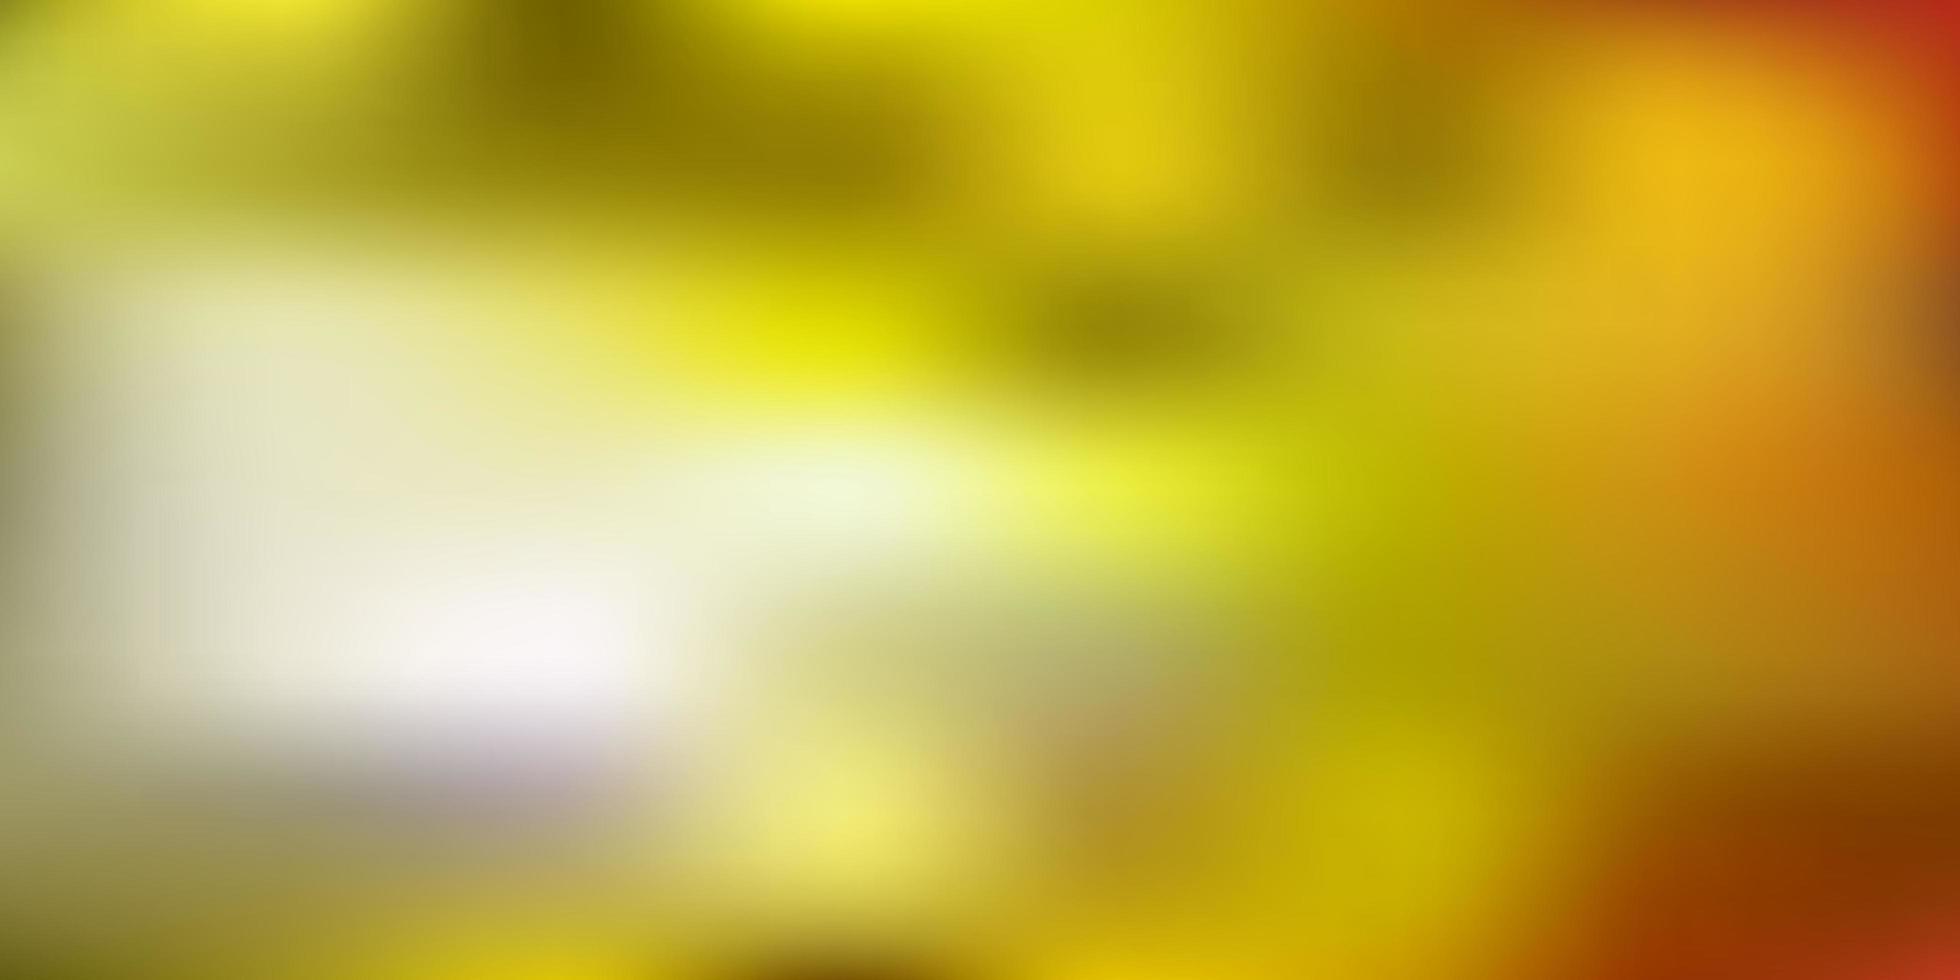 Light Yellow, Red Blurred Template vector